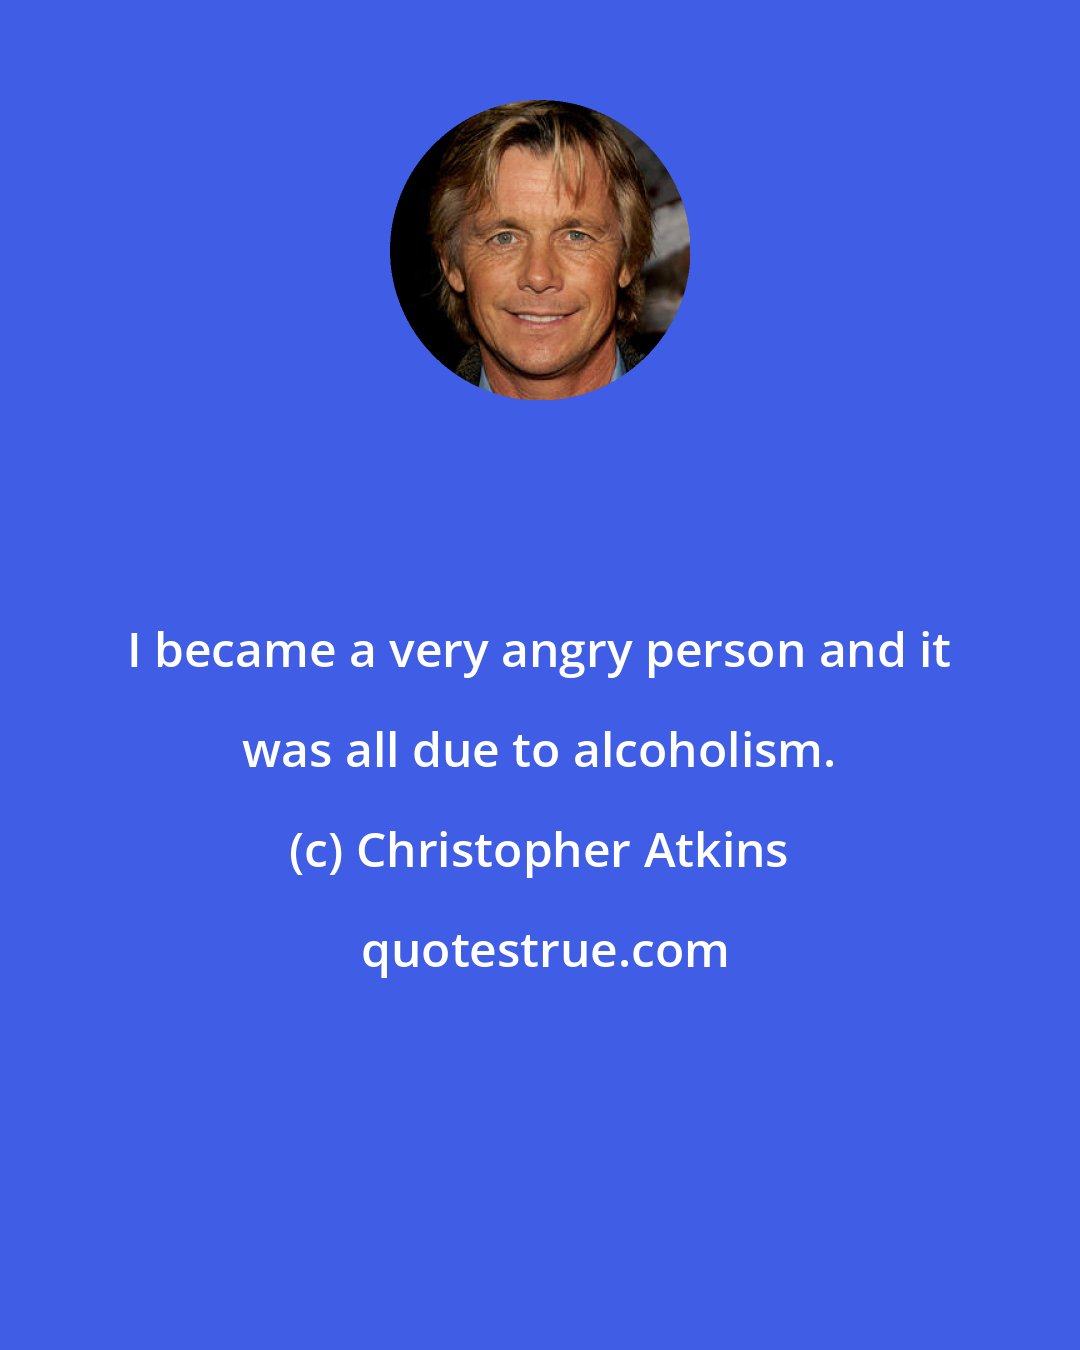 Christopher Atkins: I became a very angry person and it was all due to alcoholism.